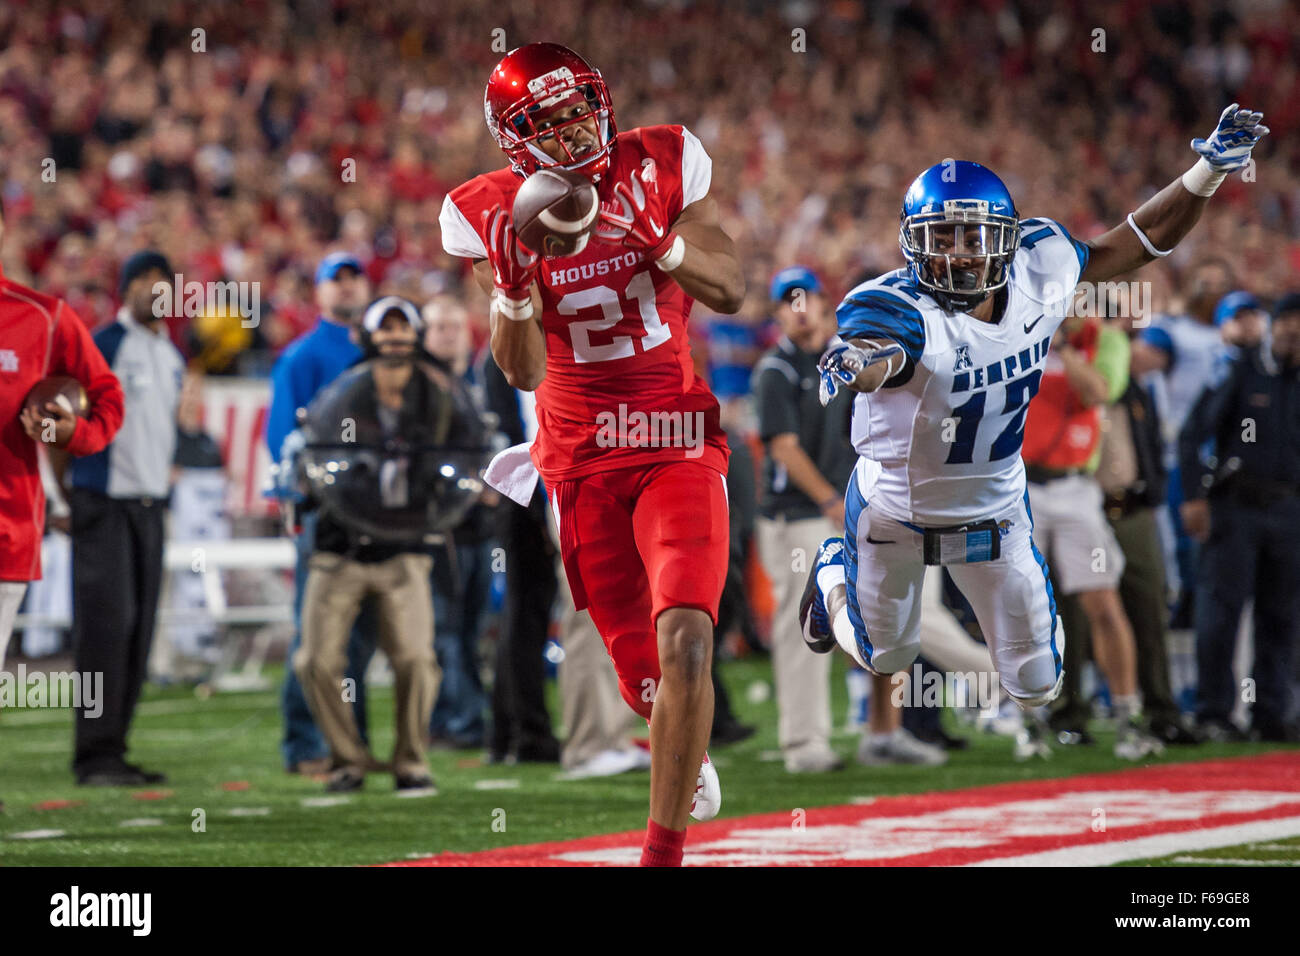 Houston, TX, USA. 14th Nov, 2015. Houston Cougars wide receiver Chance Allen (21) is unable to secure a catch in the end zone while being defended by Memphis Tigers defensive back Chauncey Lanier (12) during the 4th quarter of an NCAA football game between the Memphis Tigers and the University of Houston Cougars at TDECU Stadium in Houston, TX. Houston won the game 35-34.Trask Smith/CSM/Alamy Live News Stock Photo